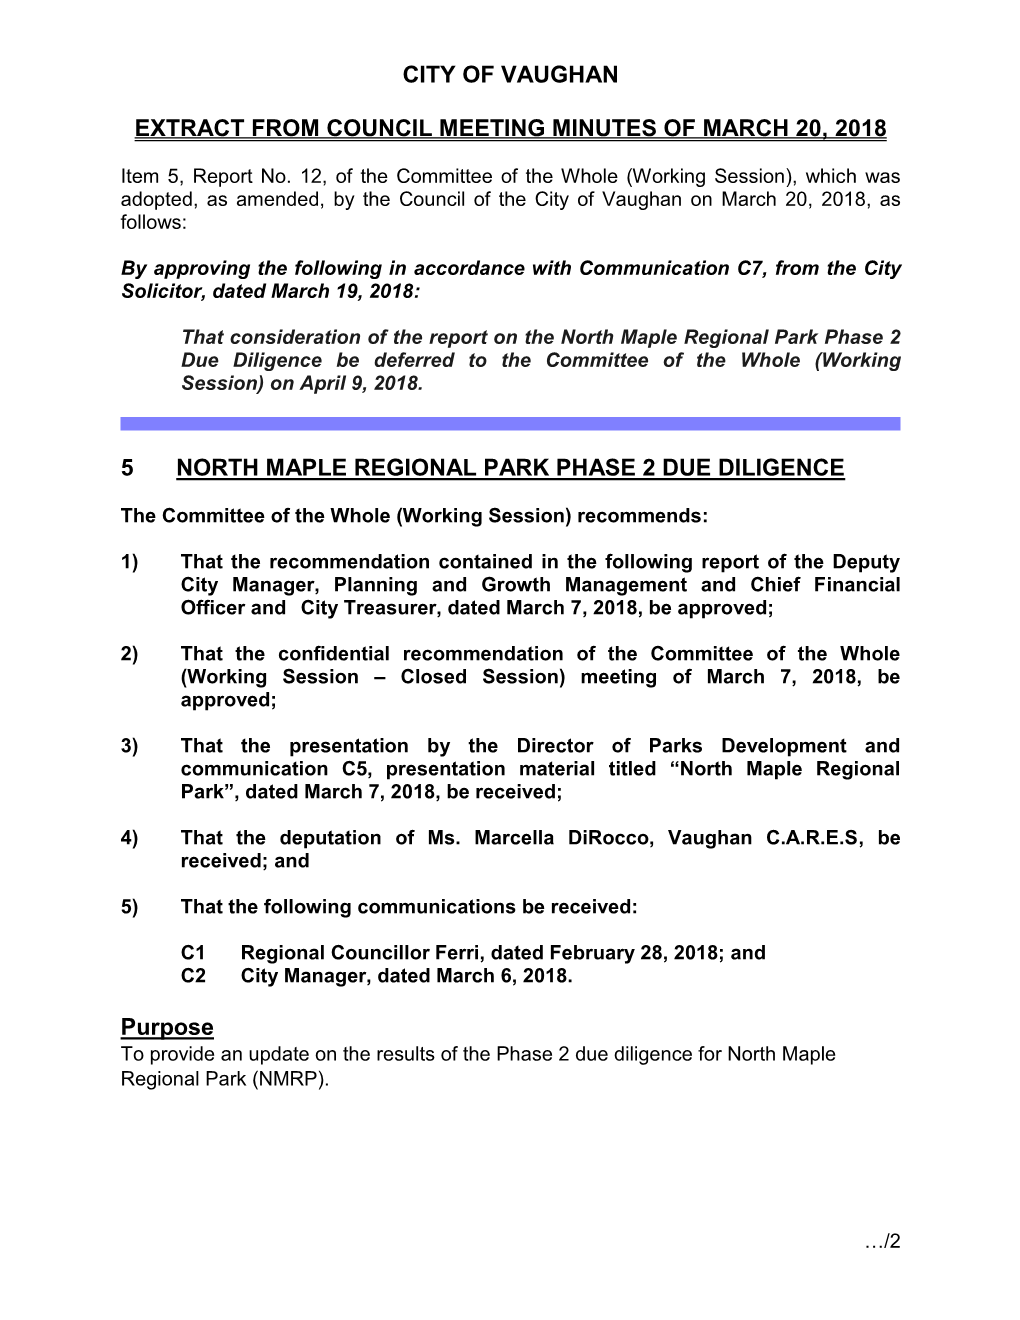 North Maple Regional Park Phase 2 Due Diligence Be Deferred to the Committee of the Whole (Working Session) on April 9, 2018